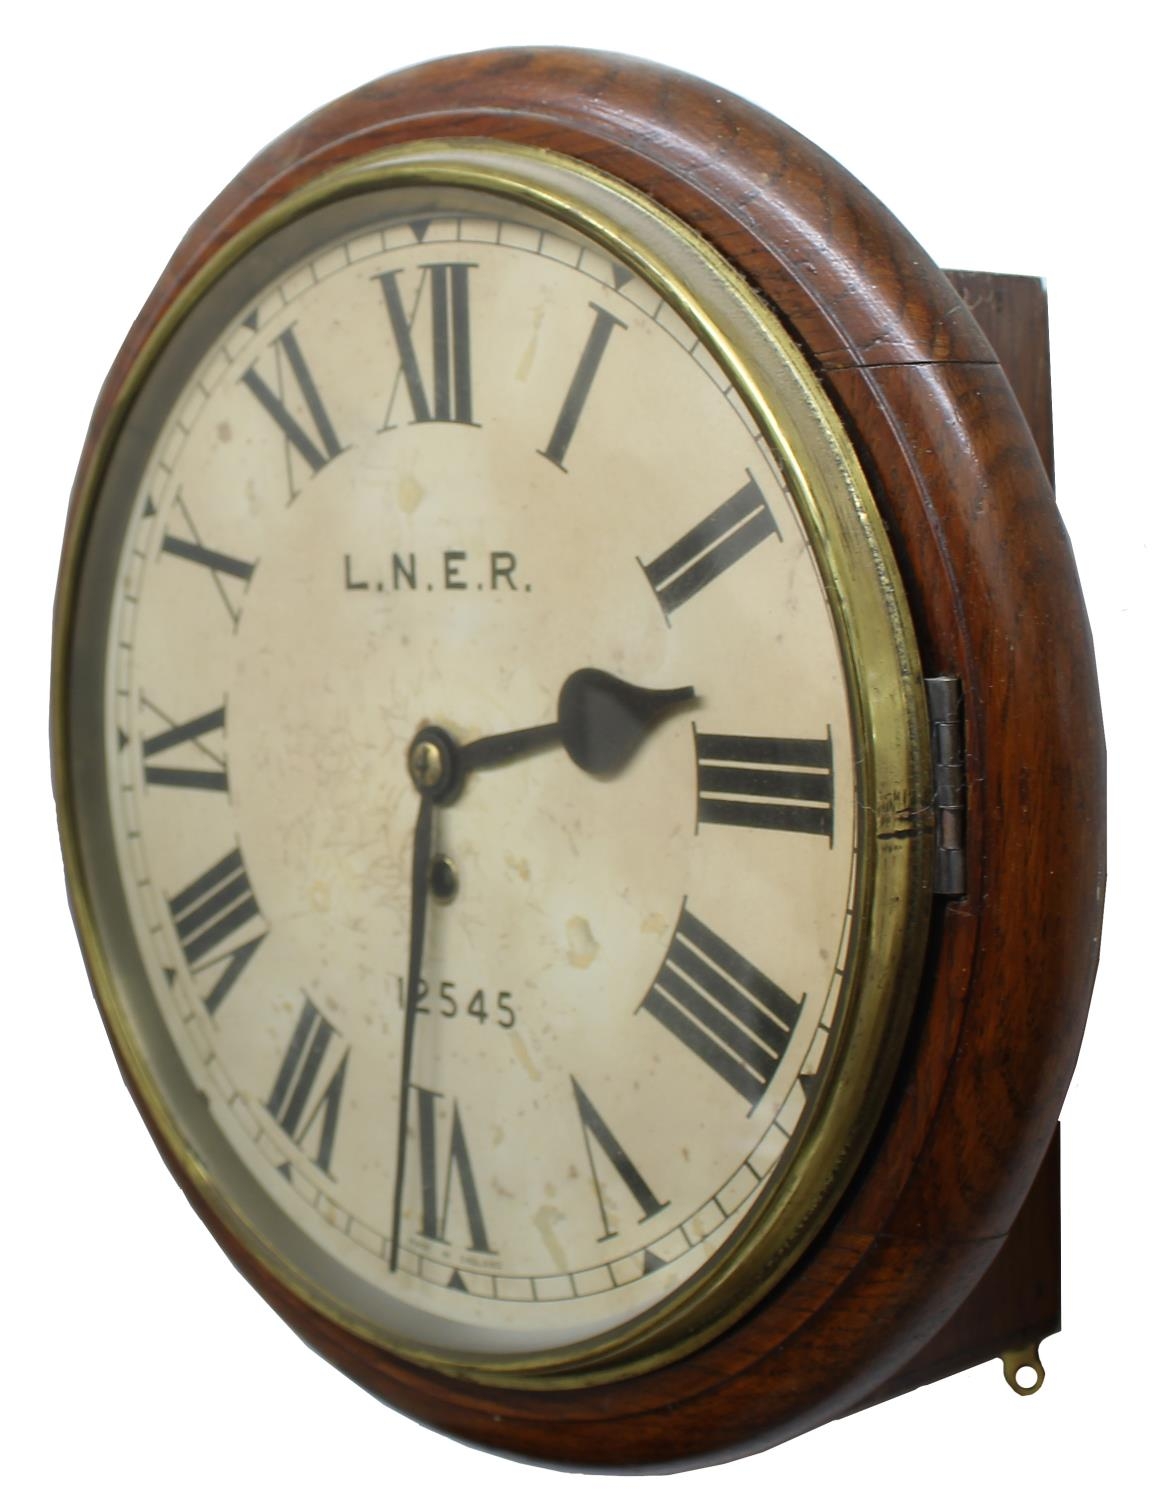 London North Eastern Railway (L.N.E.R) oak single fusee 12" wall dial clock within a turned - Image 2 of 5